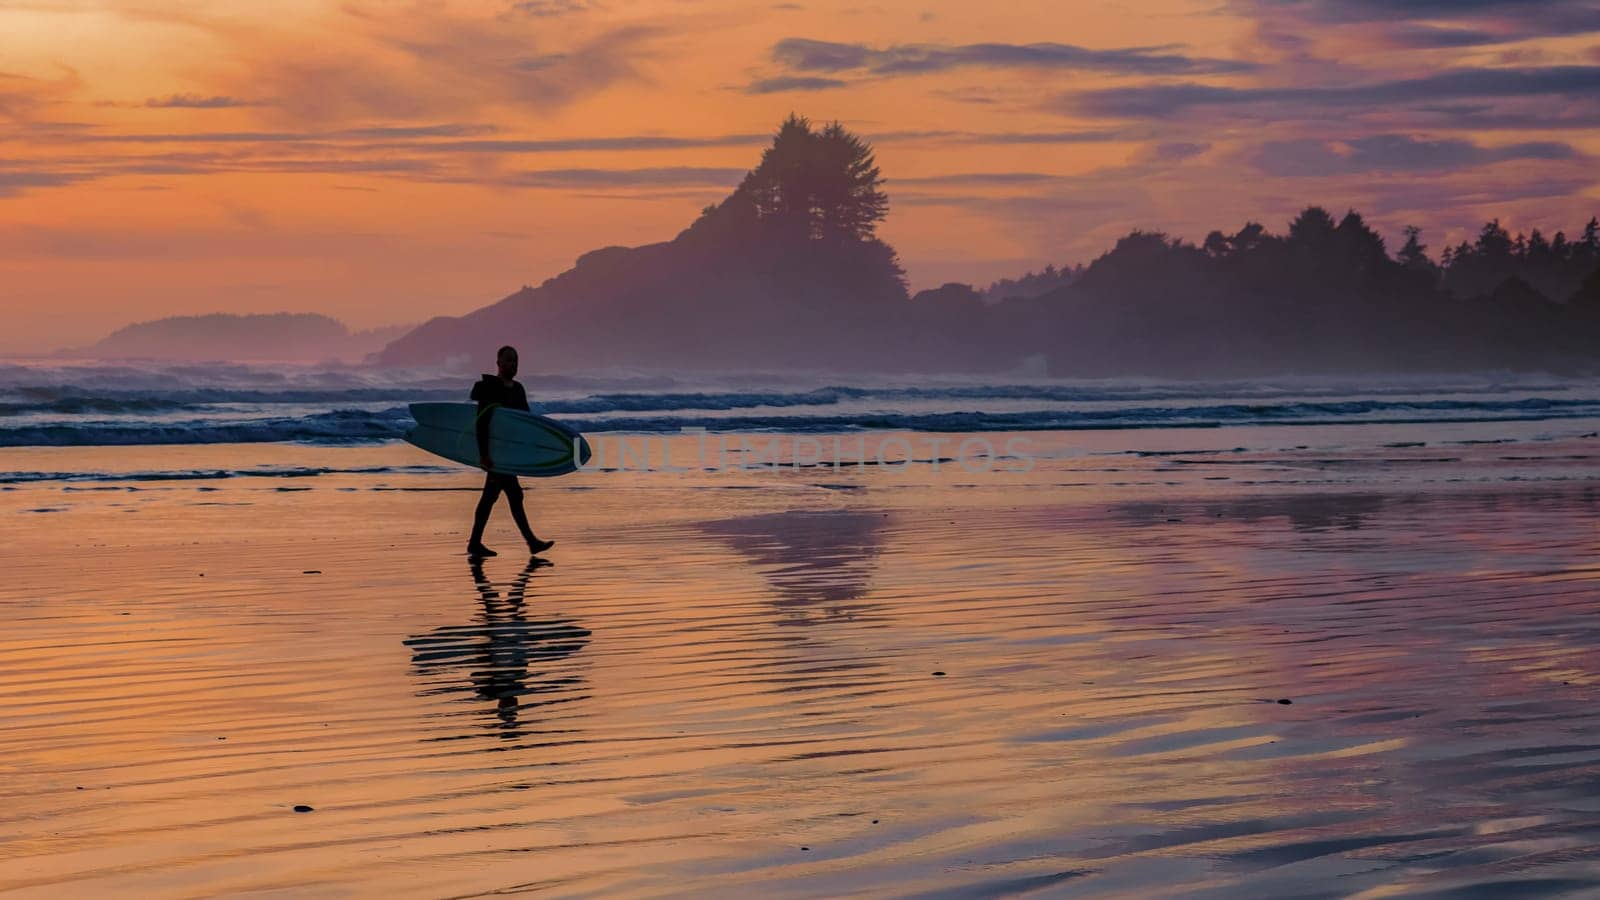 Tofino beach Vancouver Island Pacific rim coast during sunset, surfers with surfboard during sunset at the beach, surfers silhouette Canada Vancouver Island Tofino Long beach